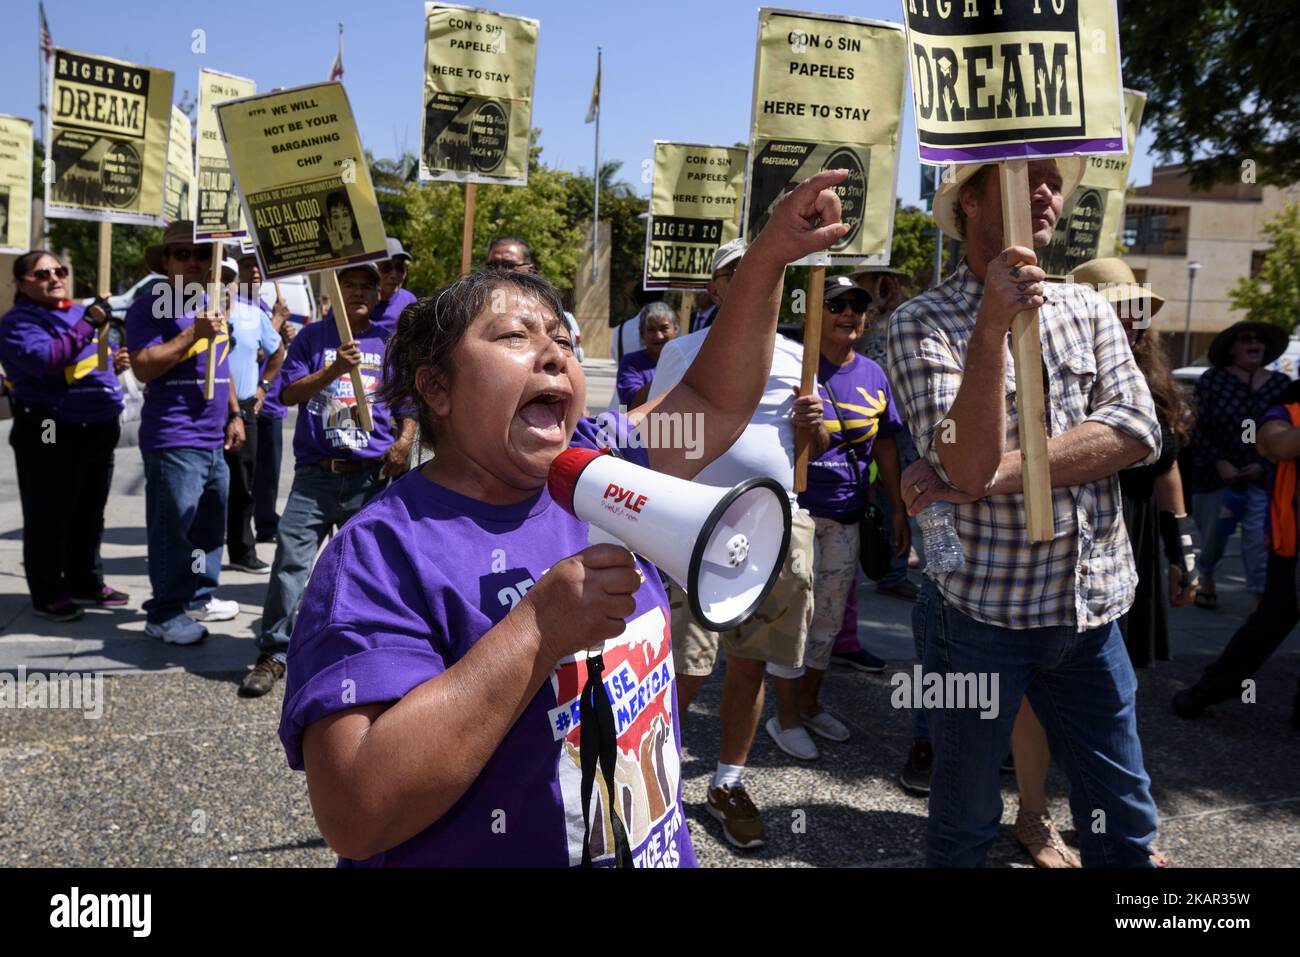 Immigration rights activists protest the Trump administration's termination of the DACA program in Los Angeles, California on September 5, 2017. The Deferred Action for Childhood Arrivals program protected 800,000 young undocumented immigrants from deportation. (Photo by Ronen Tivony/NurPhoto) Stock Photo